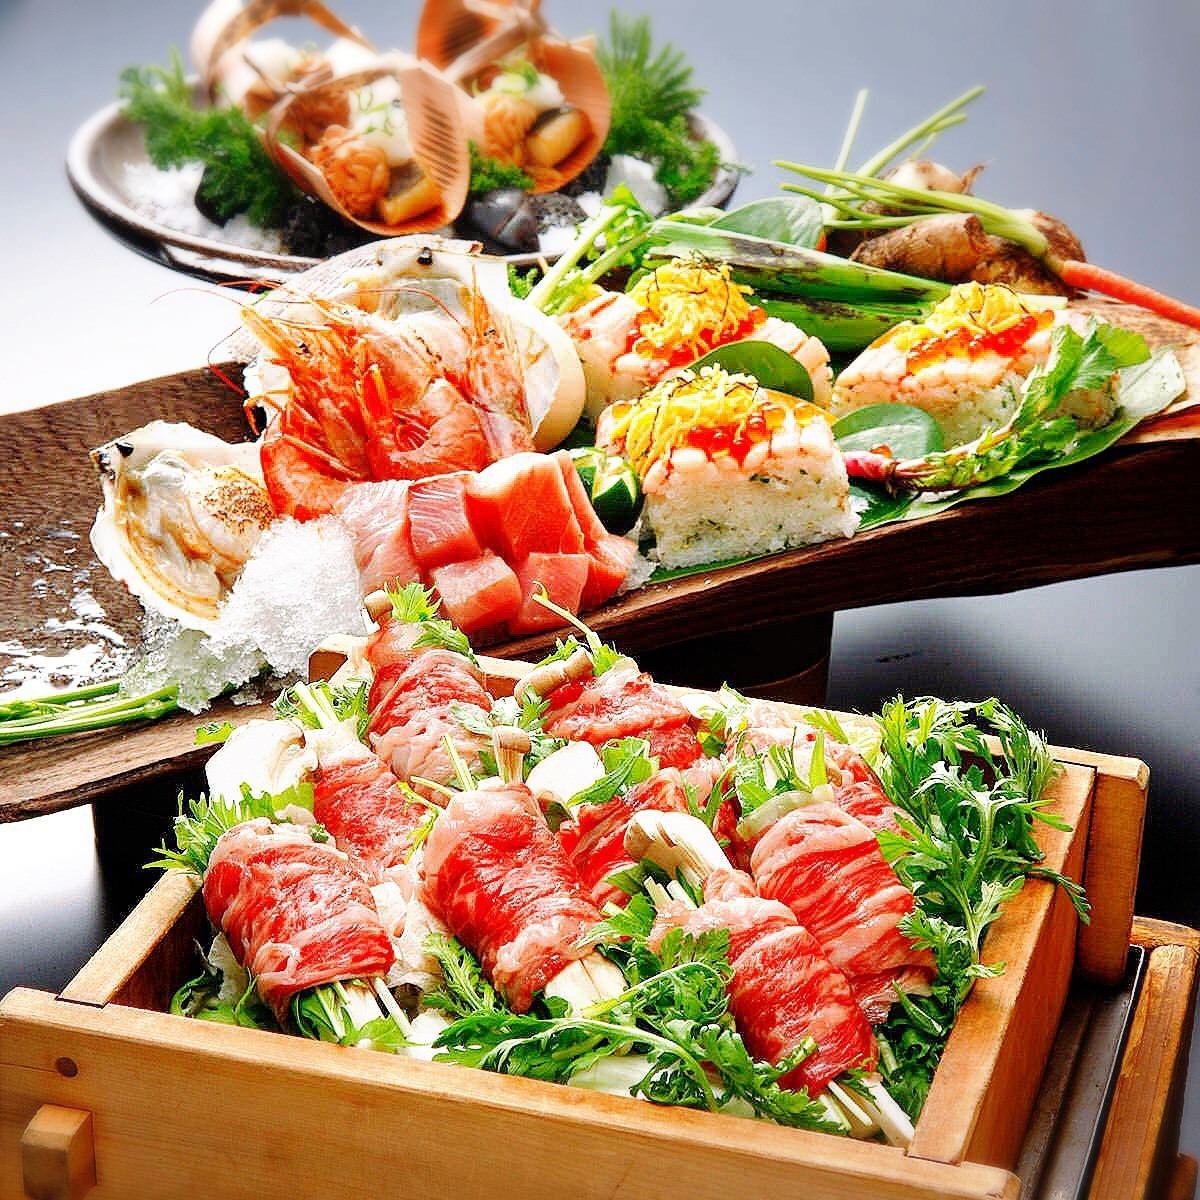 Meat sushi, yakitori, seafood, motsunabe and other Japanese cuisine / 3 hours all-you-can-eat and drink for 2,980 yen